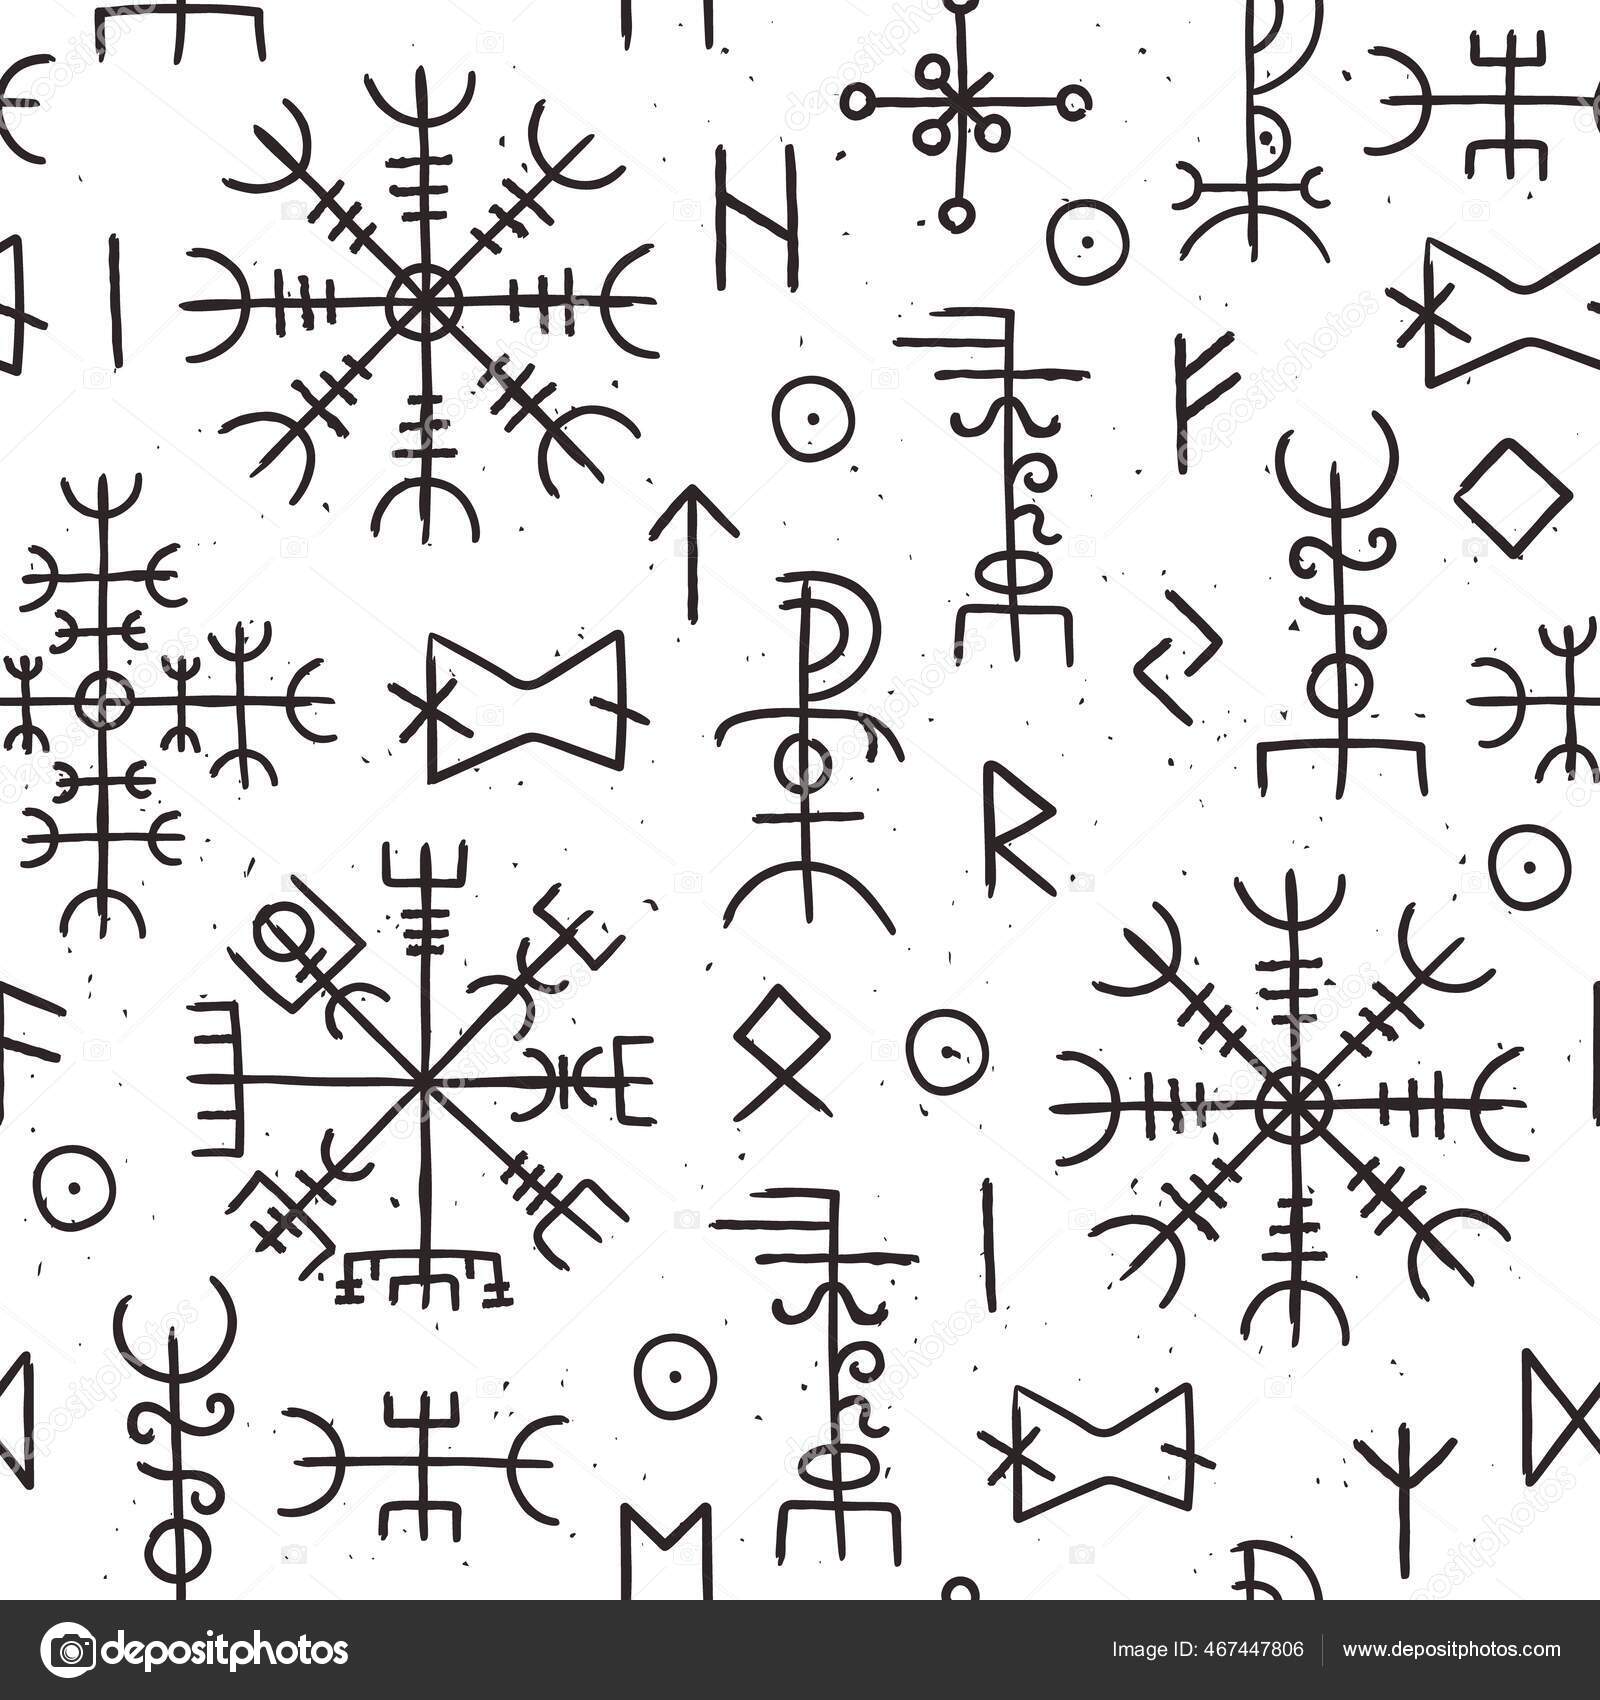 Viking runes and symbols collection.Hand drawn isolated set of